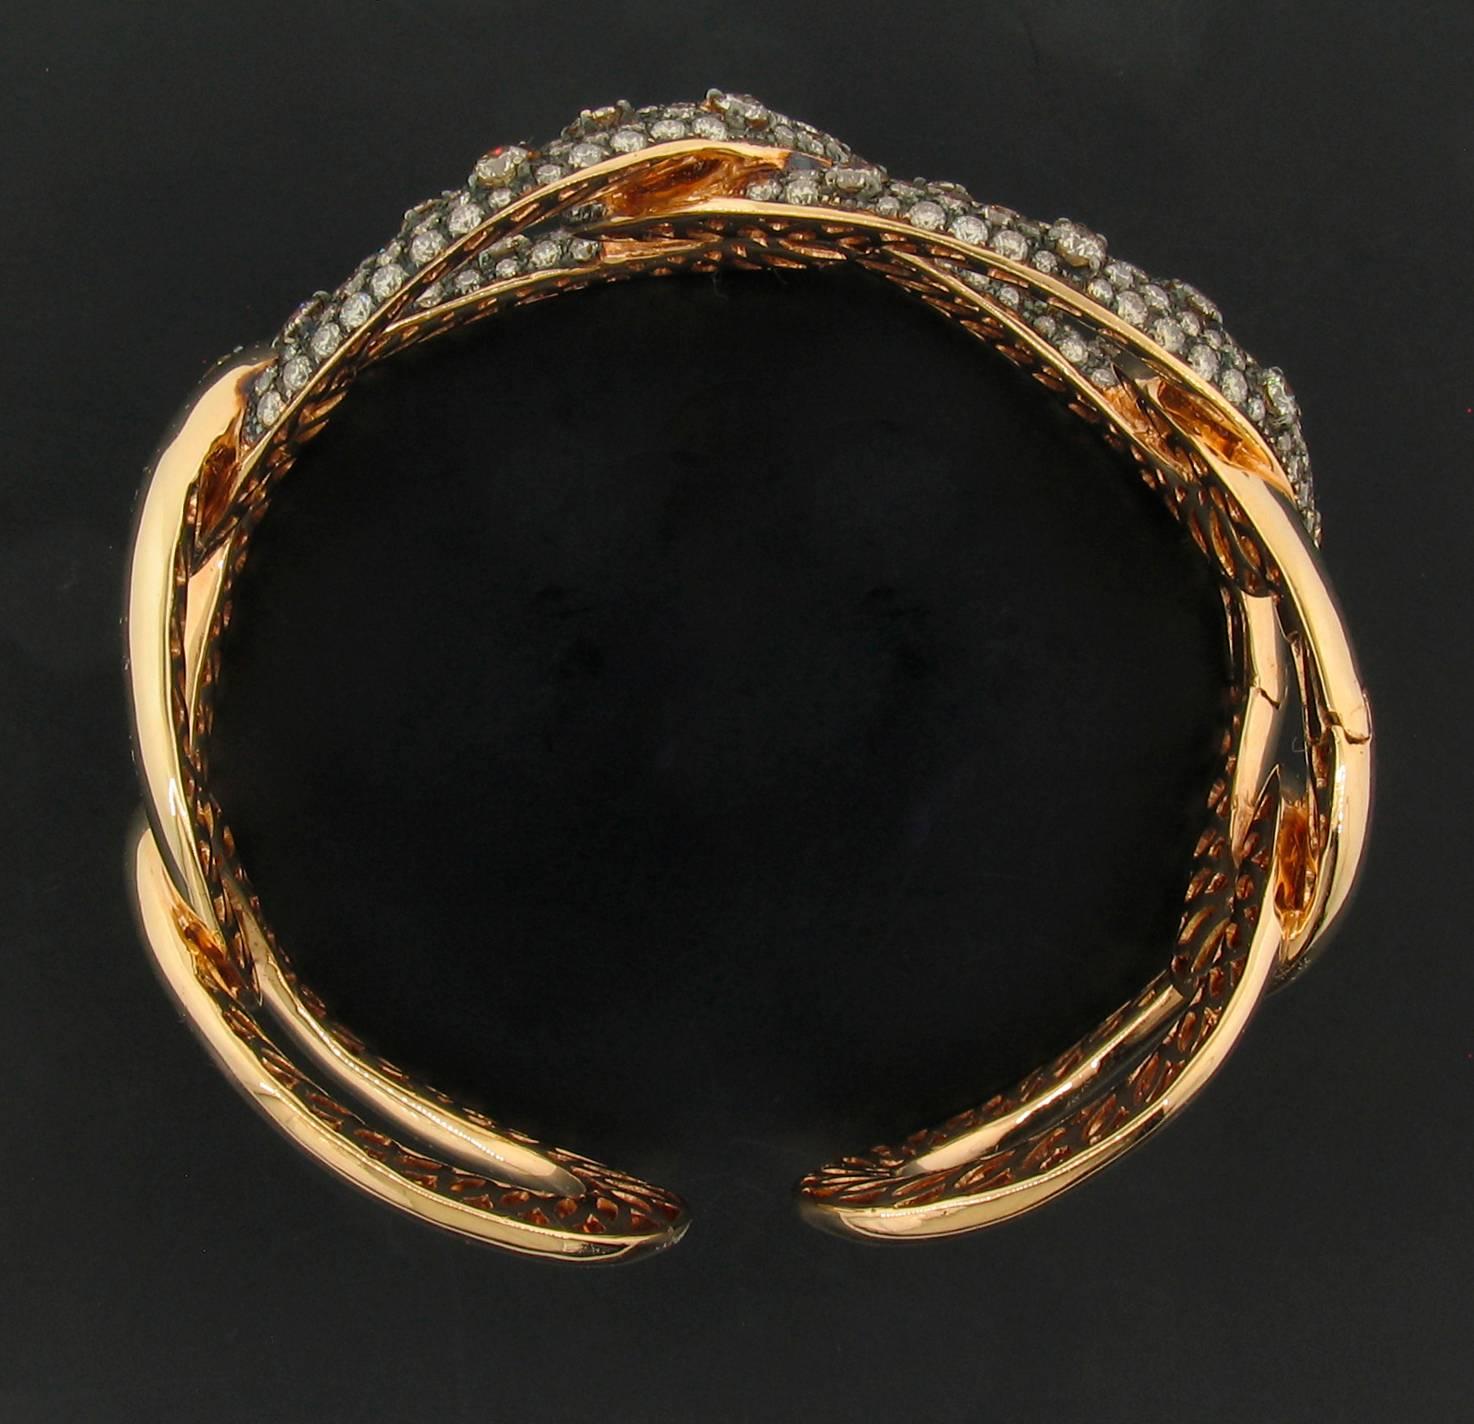 Women's Champagne Diamond and Gold Link Cuff Bracelet